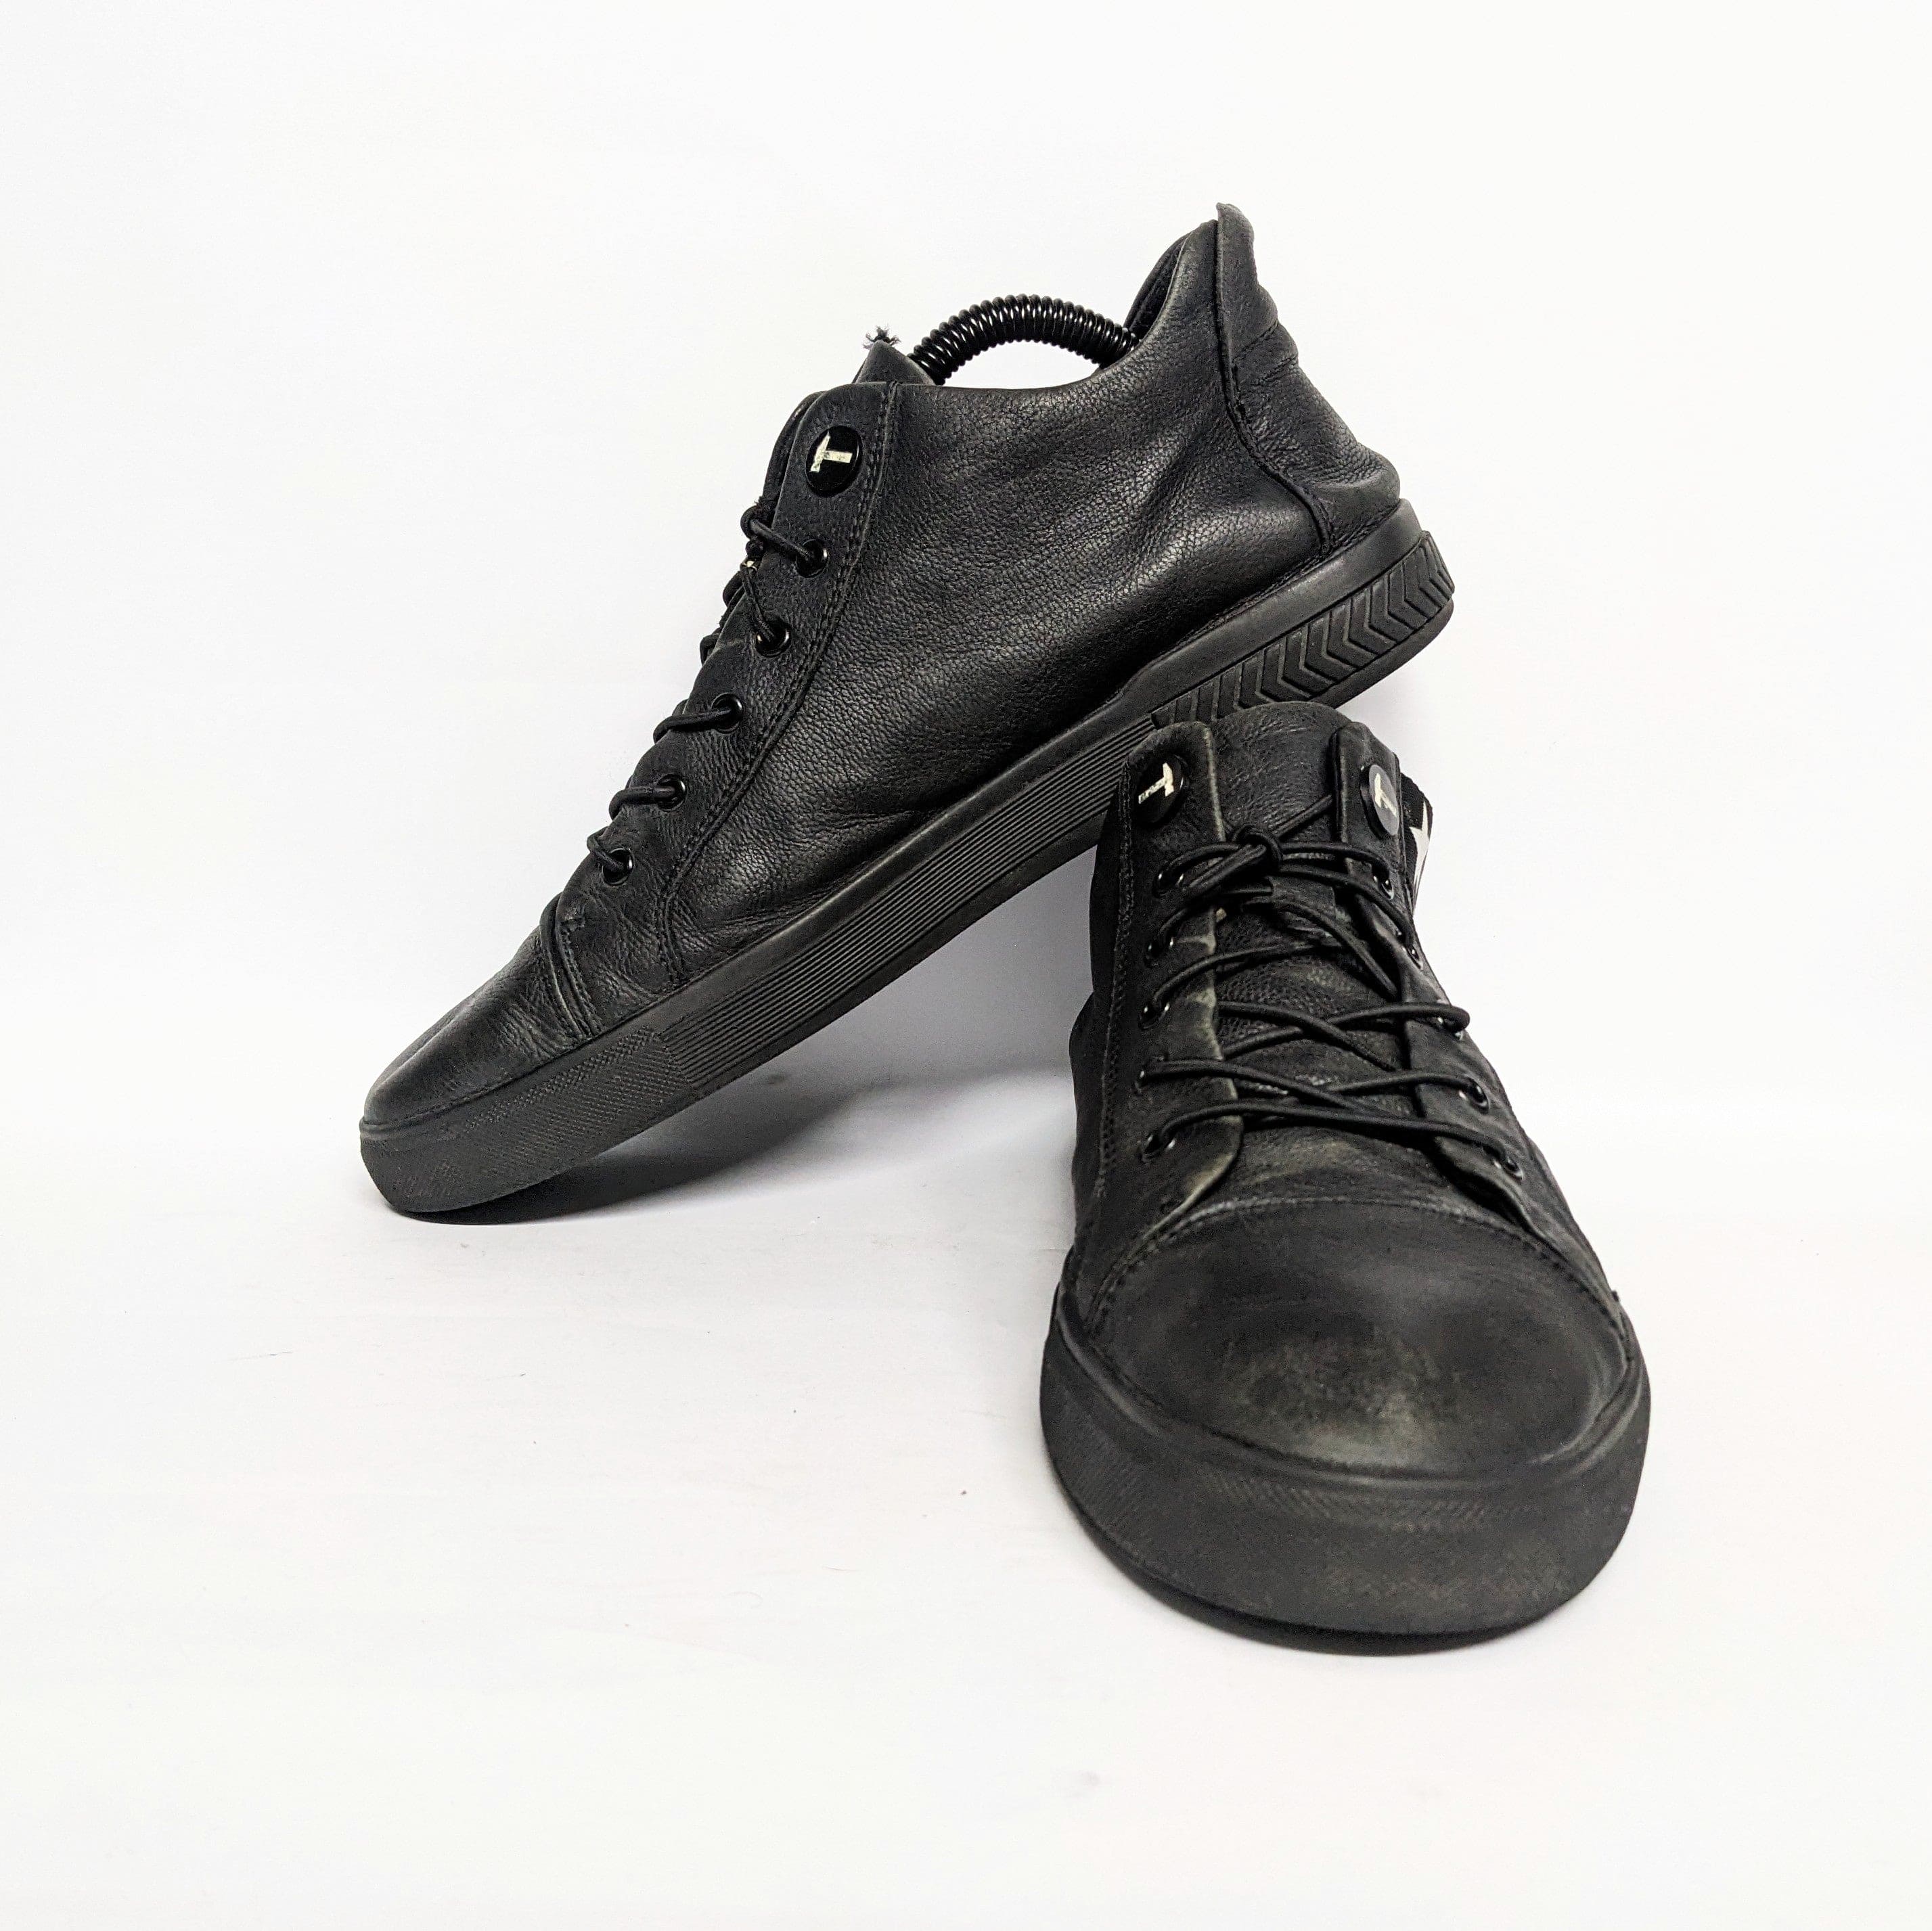 Shop Black American Leather Sneakers